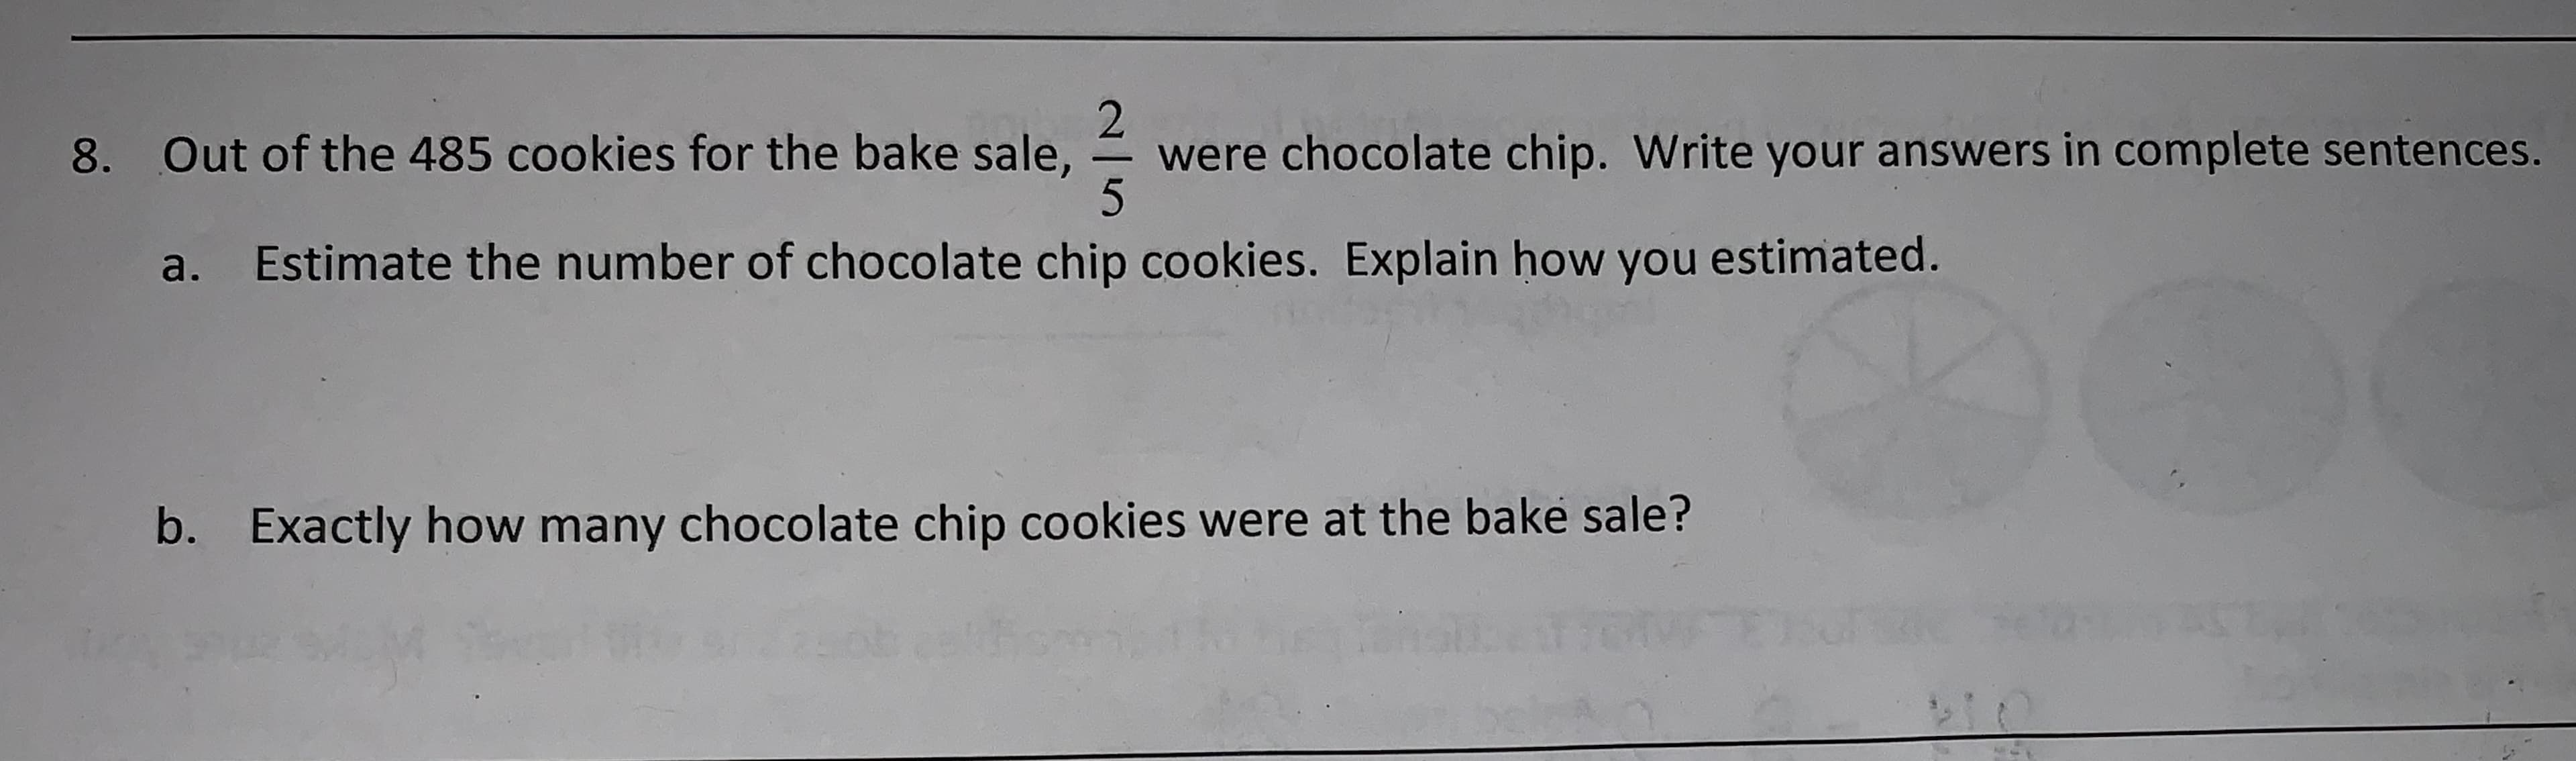 2
were chocolate chip. Write your answers in complete sentences.
$5
Out of the 485 cookies for the bake sale,
8.
Estimate the number of chocolate chip cookies. Explain how you estimated.
a.
b.
Exactly how many chocolate chip cookies were at the bake sale?
Cek?
